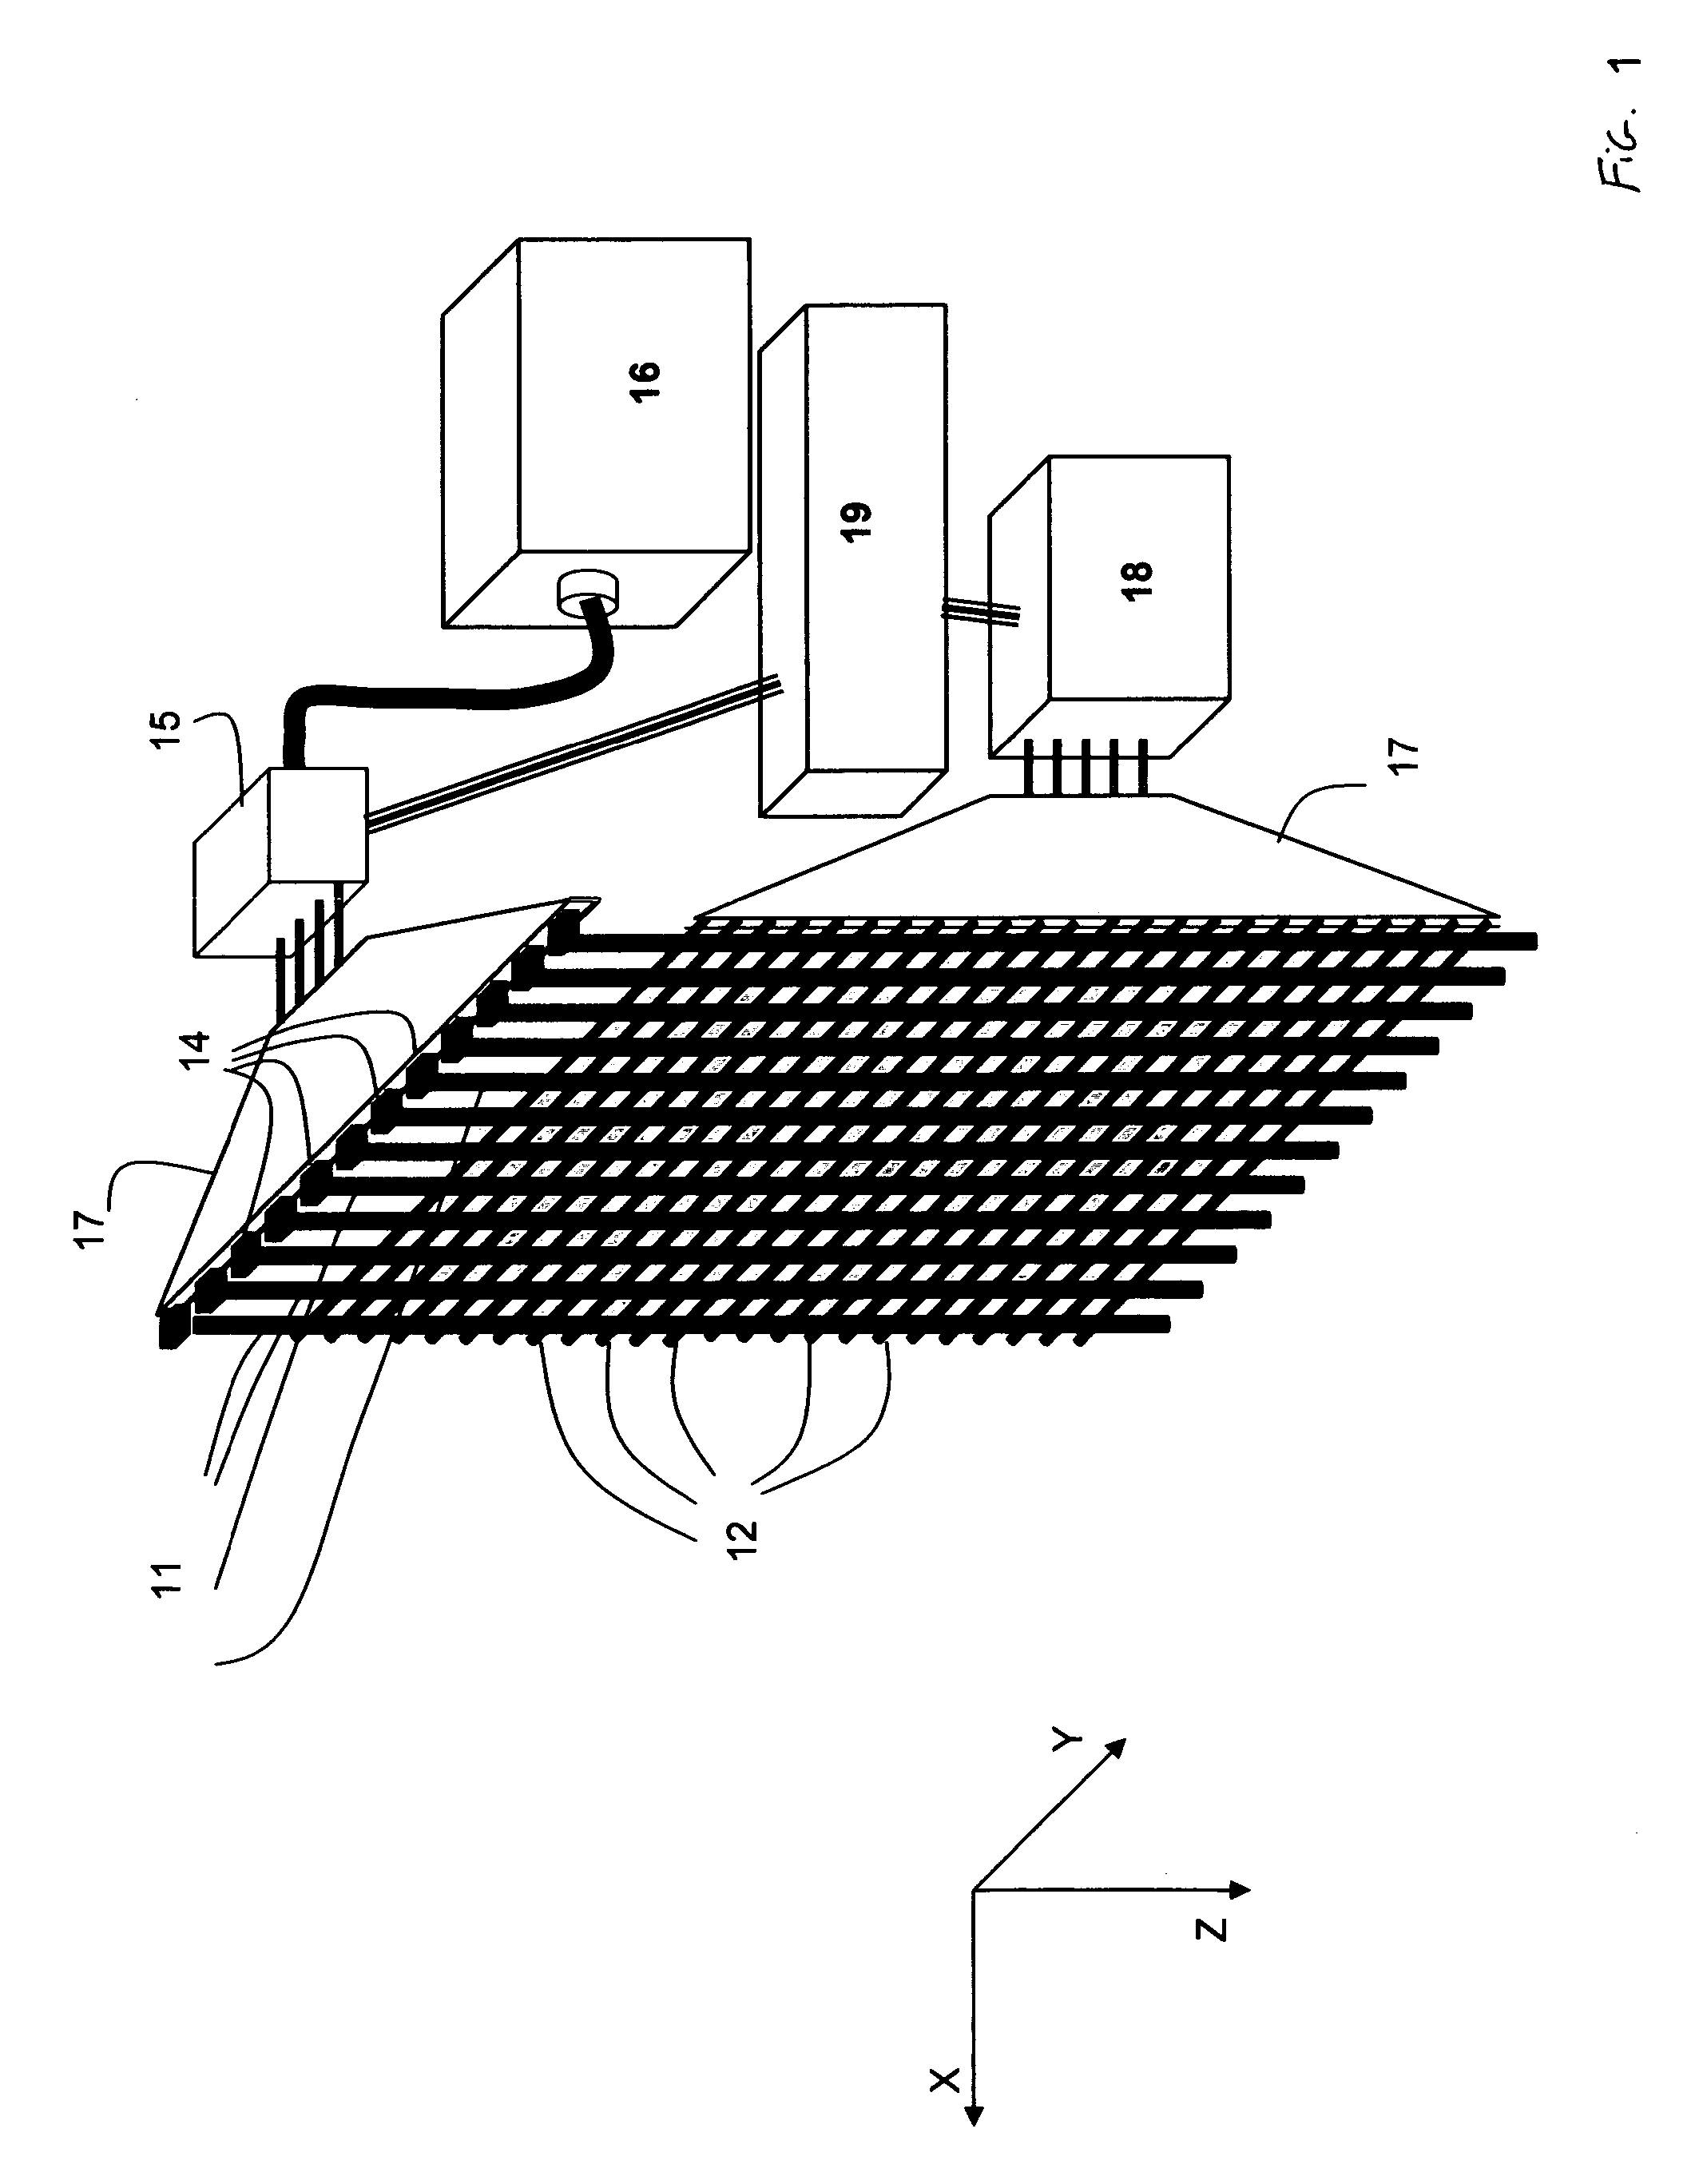 System and method for fiber optics based direct view giant screen flat panel display